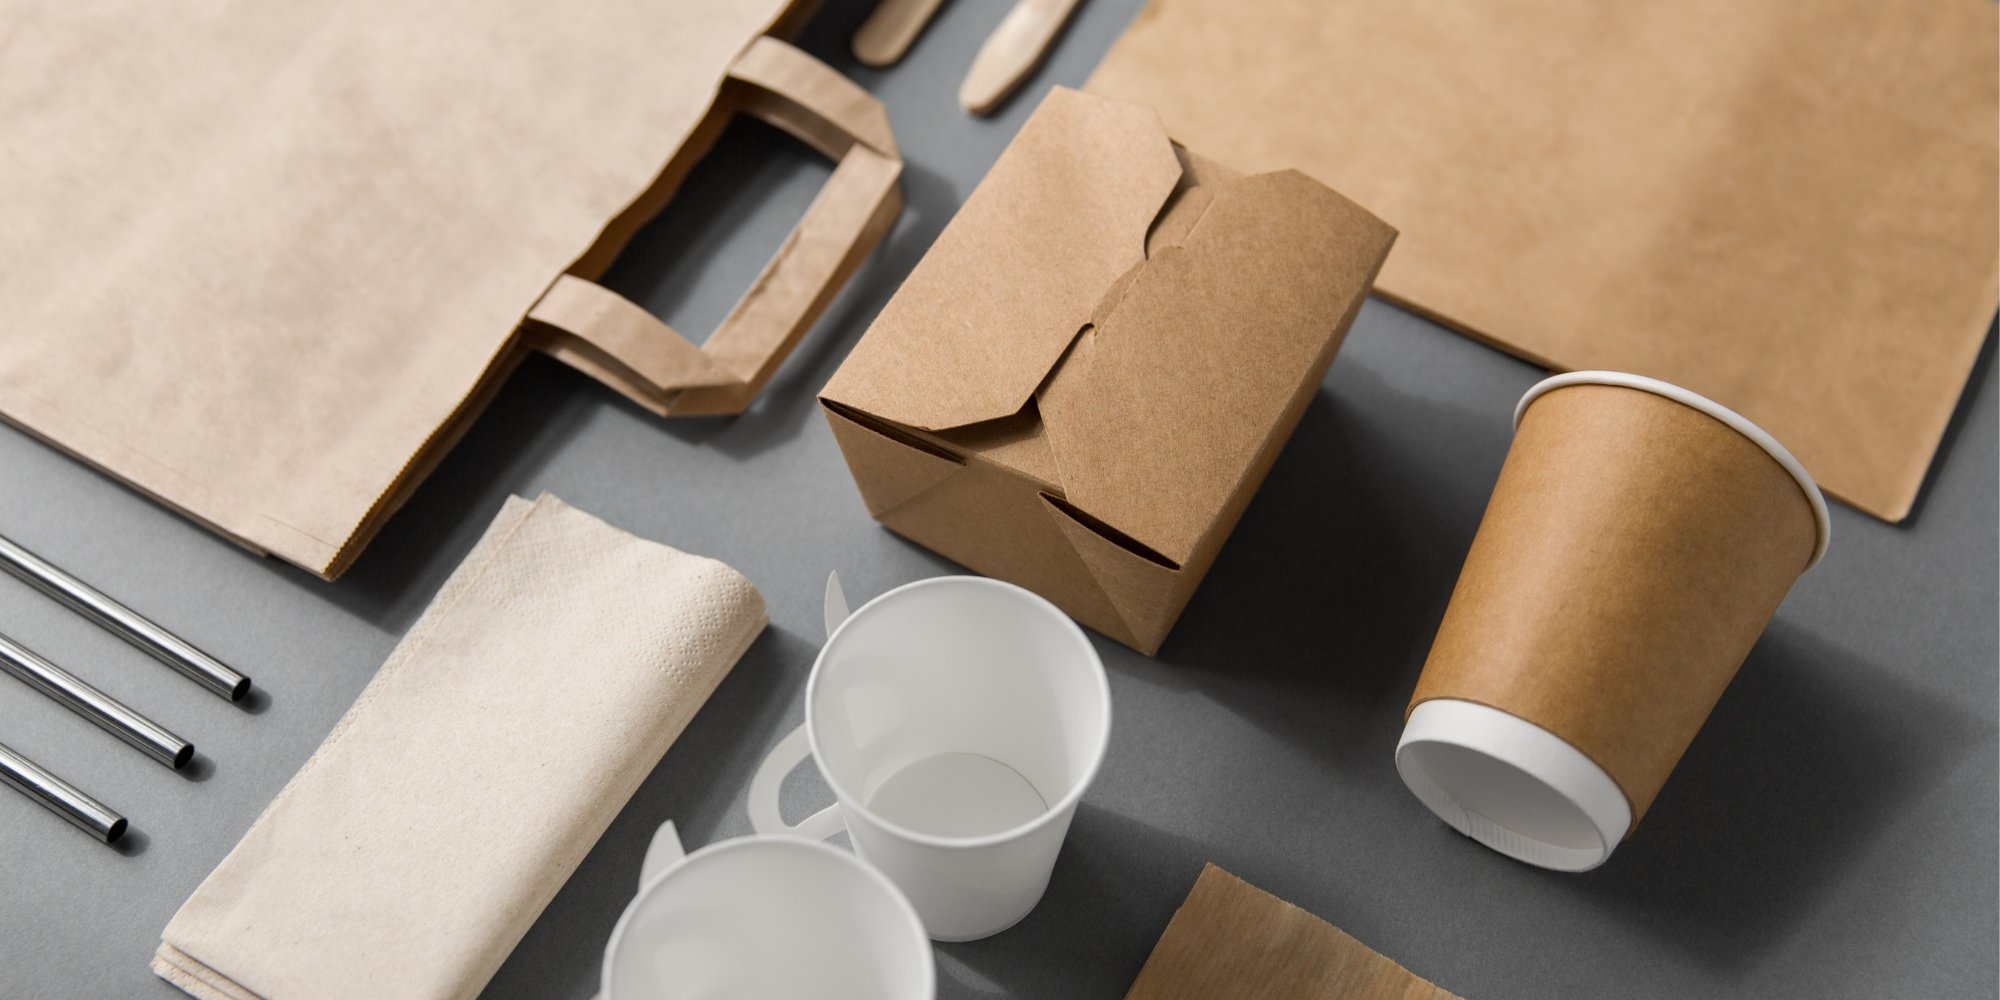 Shifting the problem from plastic to paper-based packaging